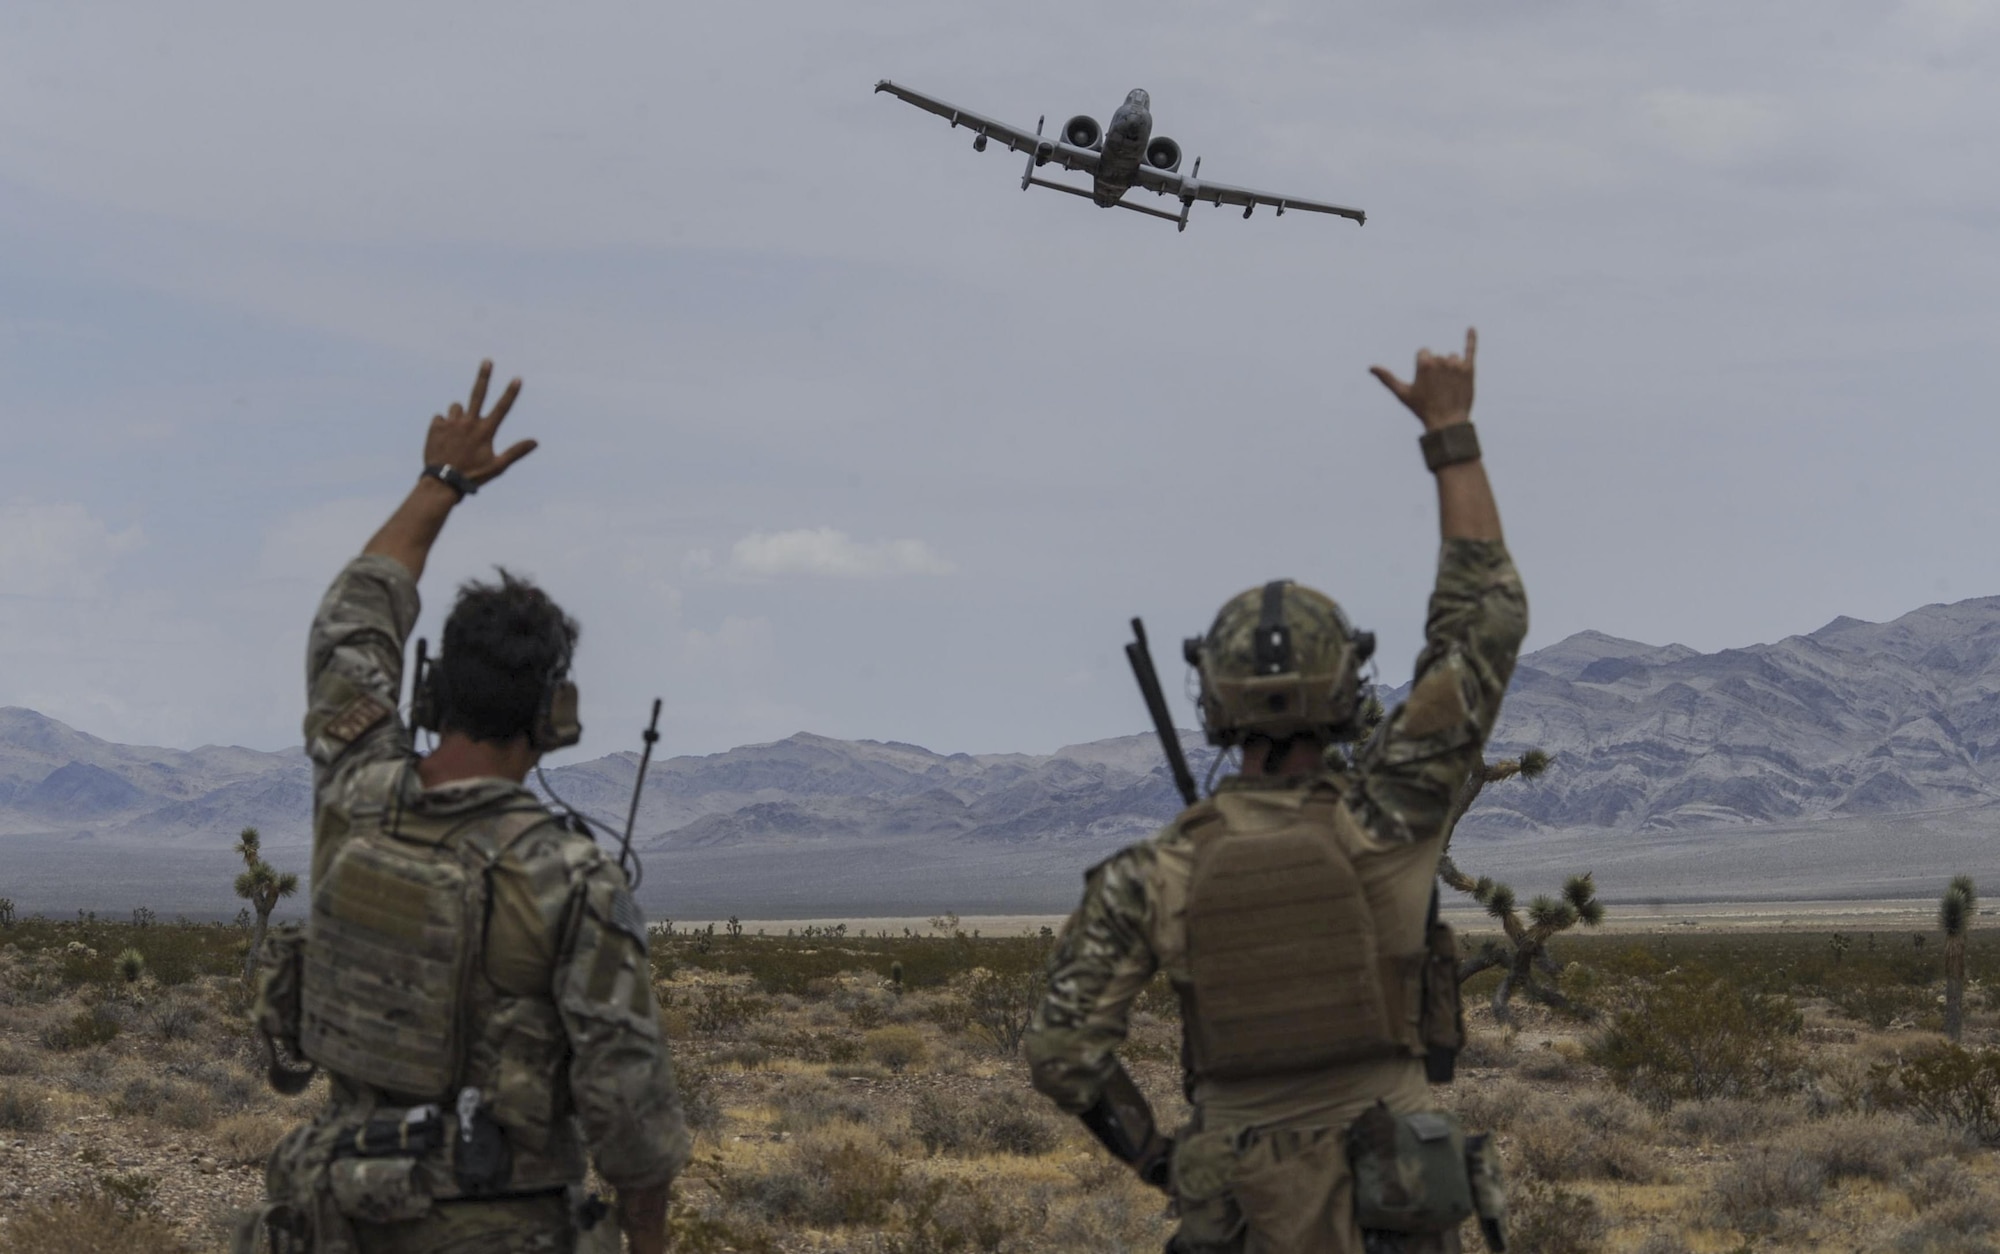 Joint terminal attack controllers wave at an A-10 Thunderbolt II attack aircraft during a show of force on the Nevada Test and Training Range July 19, 2017. The A-10 has excellent maneuverability at low air speeds and low-altitude, and is a highly accurate weapons delivery platform. (U.S. Air Force photo by Senior Airman Kevin Tanenbaum/Released)